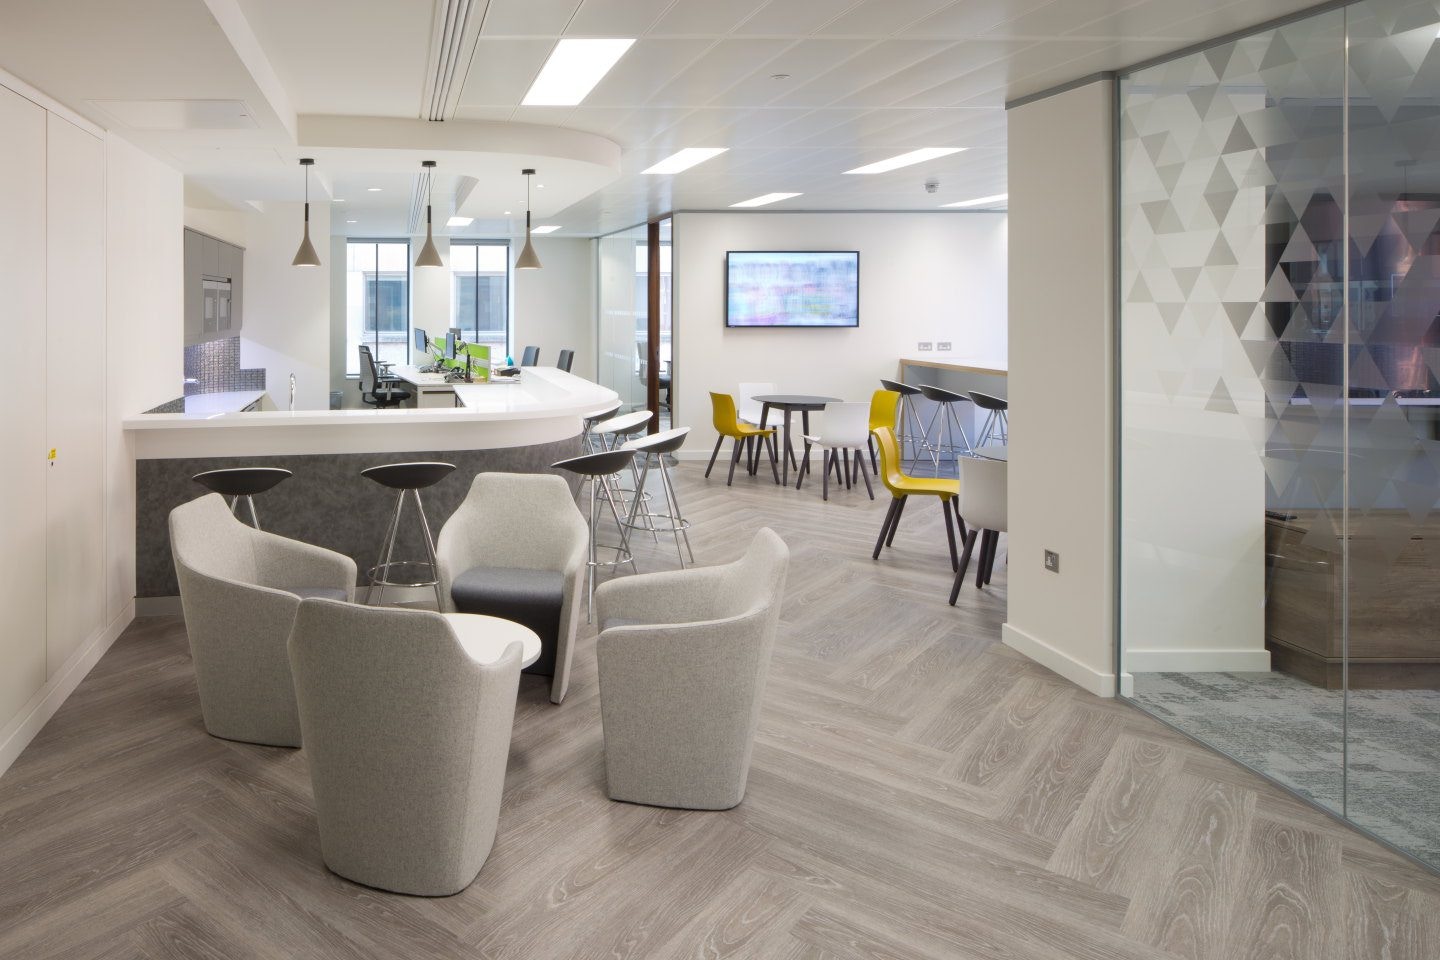 Vital Energi Modern office fit out